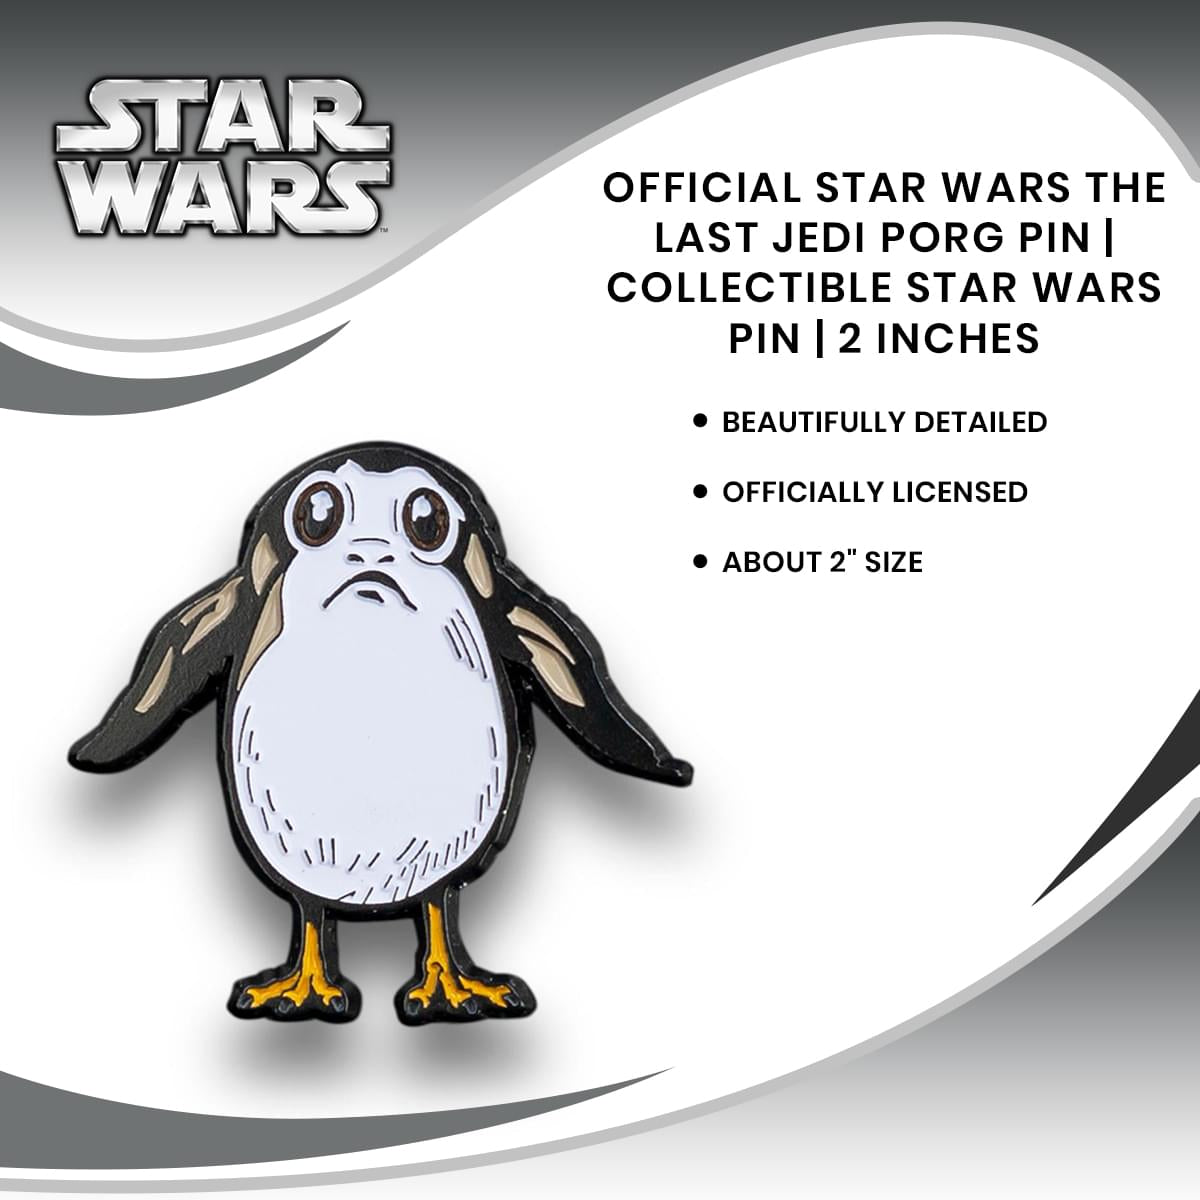 OFFICIAL Star Wars The Last Jedi Porg Pin | Collectible Star Wars Pin | 2 Inches